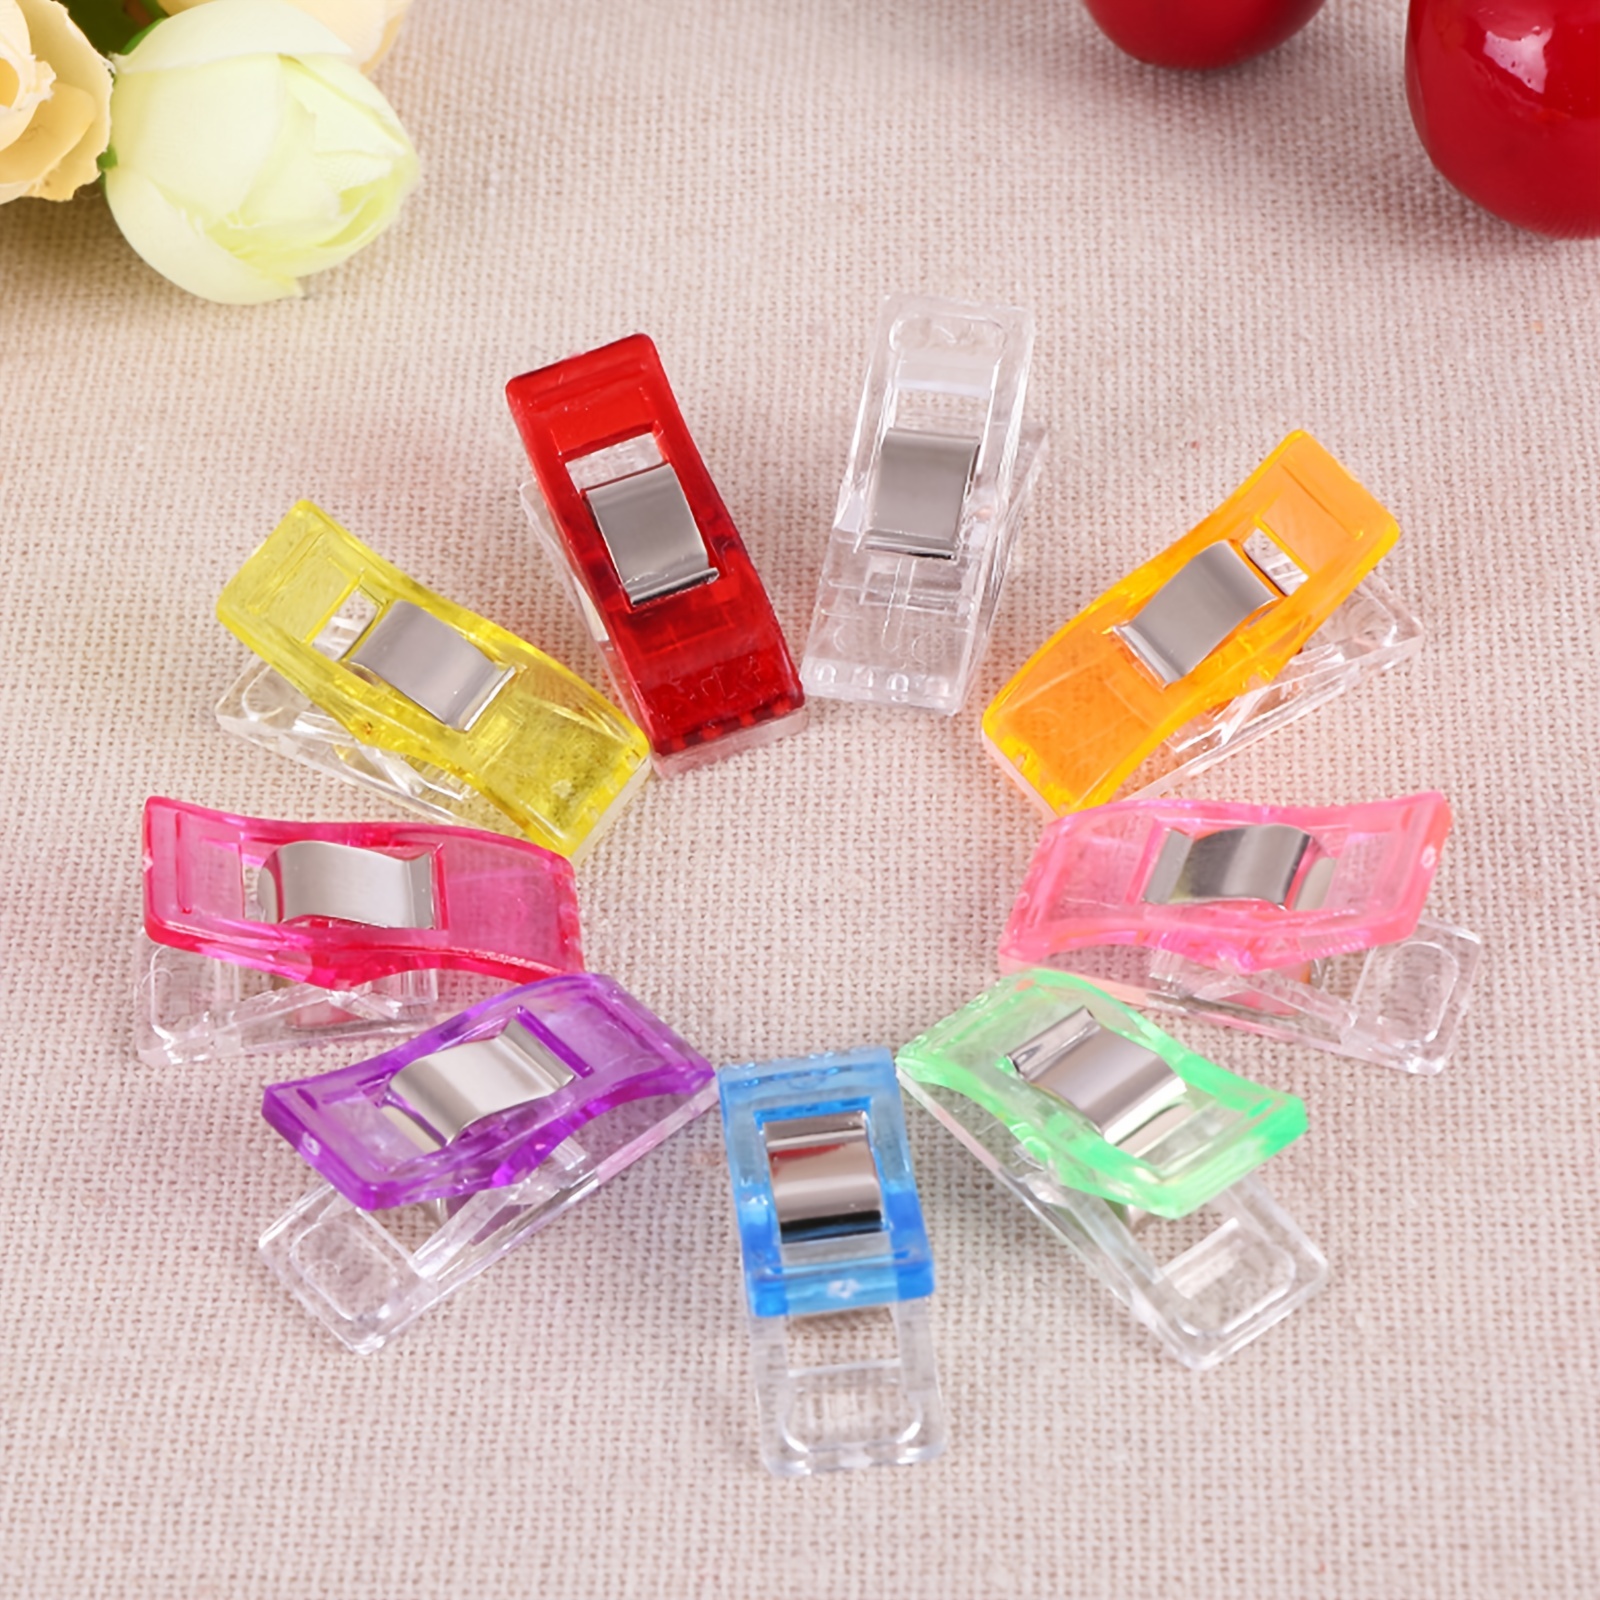 Sewing Craft Quilt Binding Plastic Clip Clamps